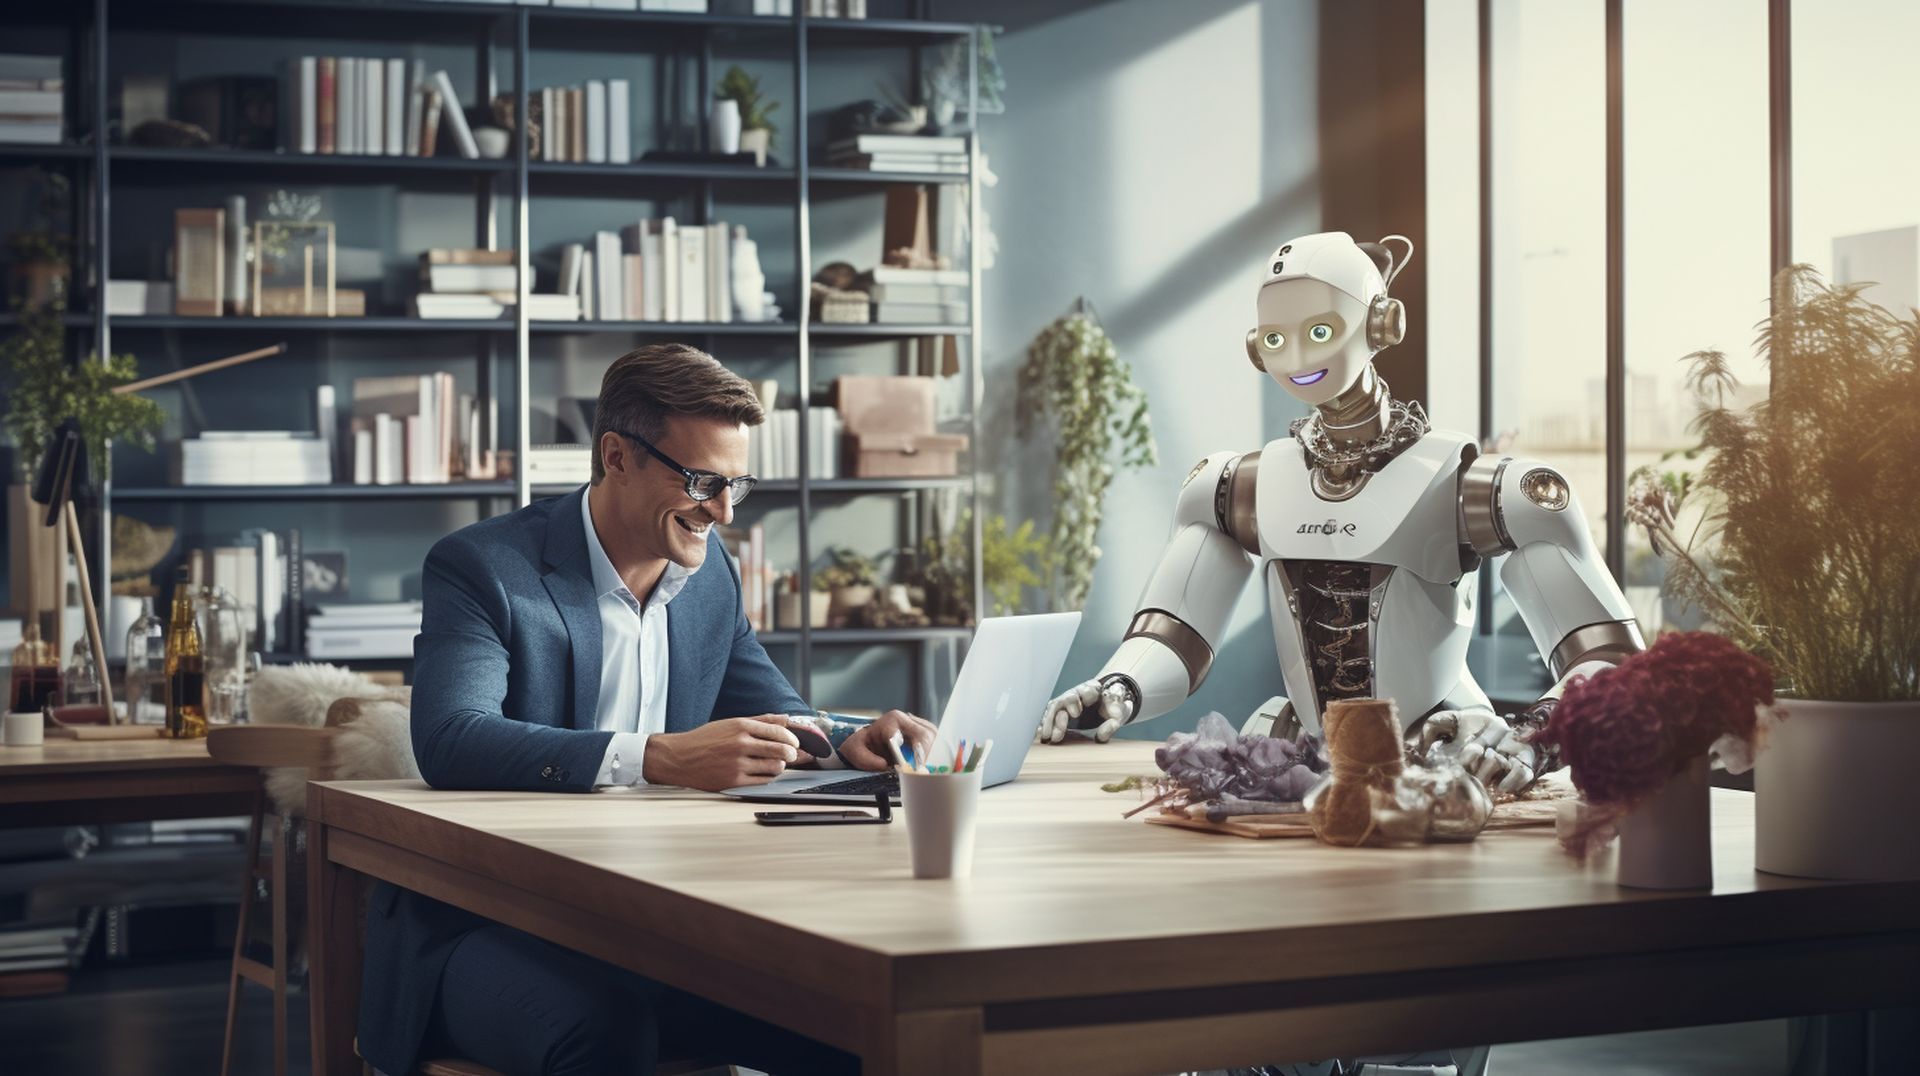 humans working together in a creative content agency. two robots helping them about what thay need. mood is happy, working